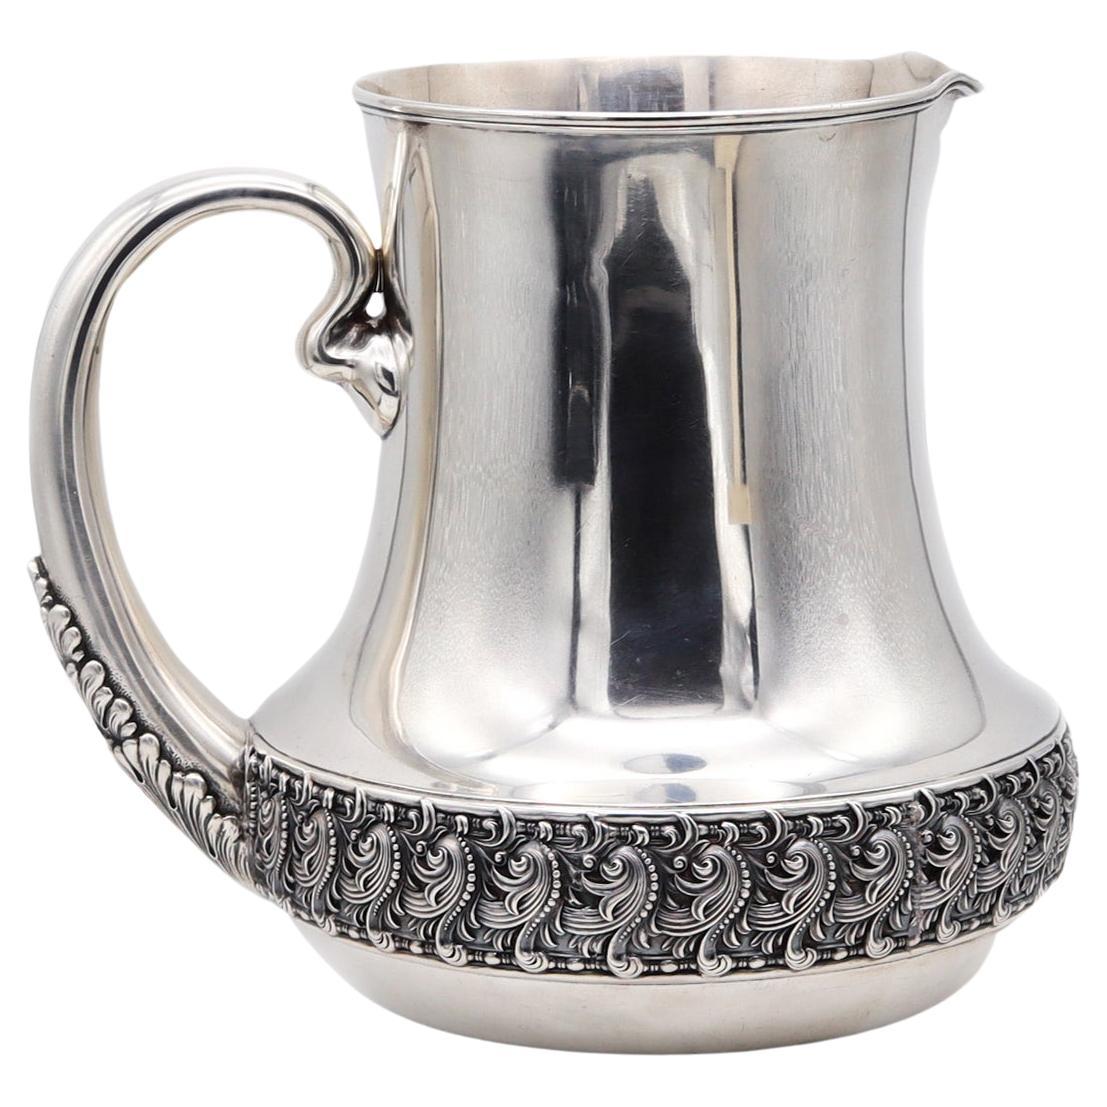 Tiffany & Co 1891 Charles L Tiffany Art Nouveau Water Pitcher in 925 Sterling 